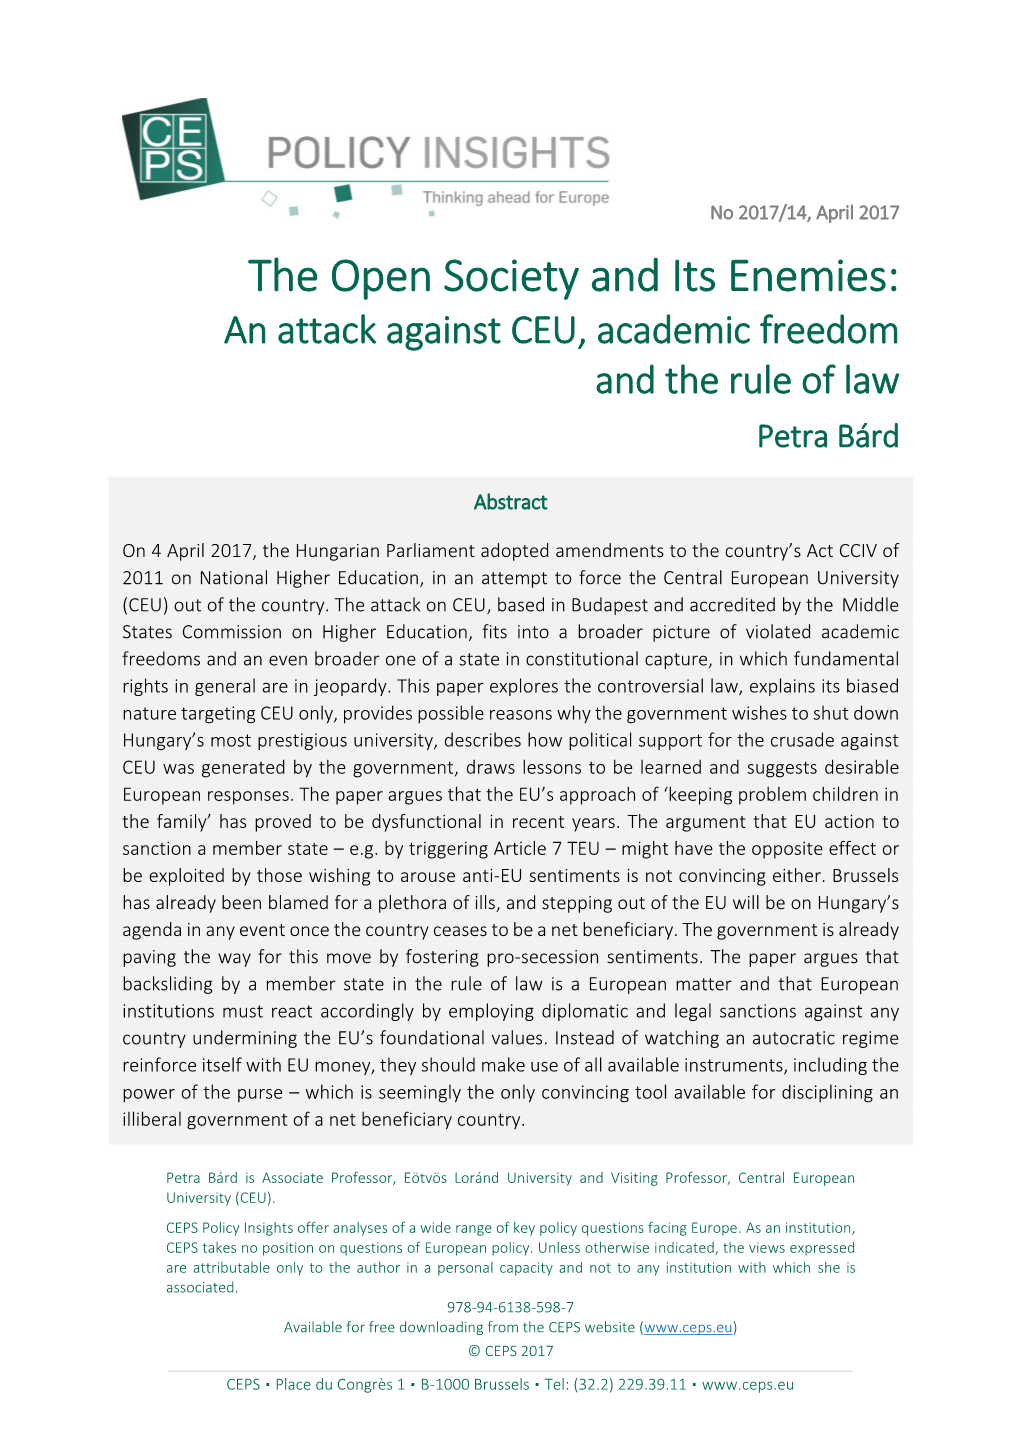 The Open Society and Its Enemies: an Attack Against CEU, Academic Freedom and the Rule of Law Petra Bárd